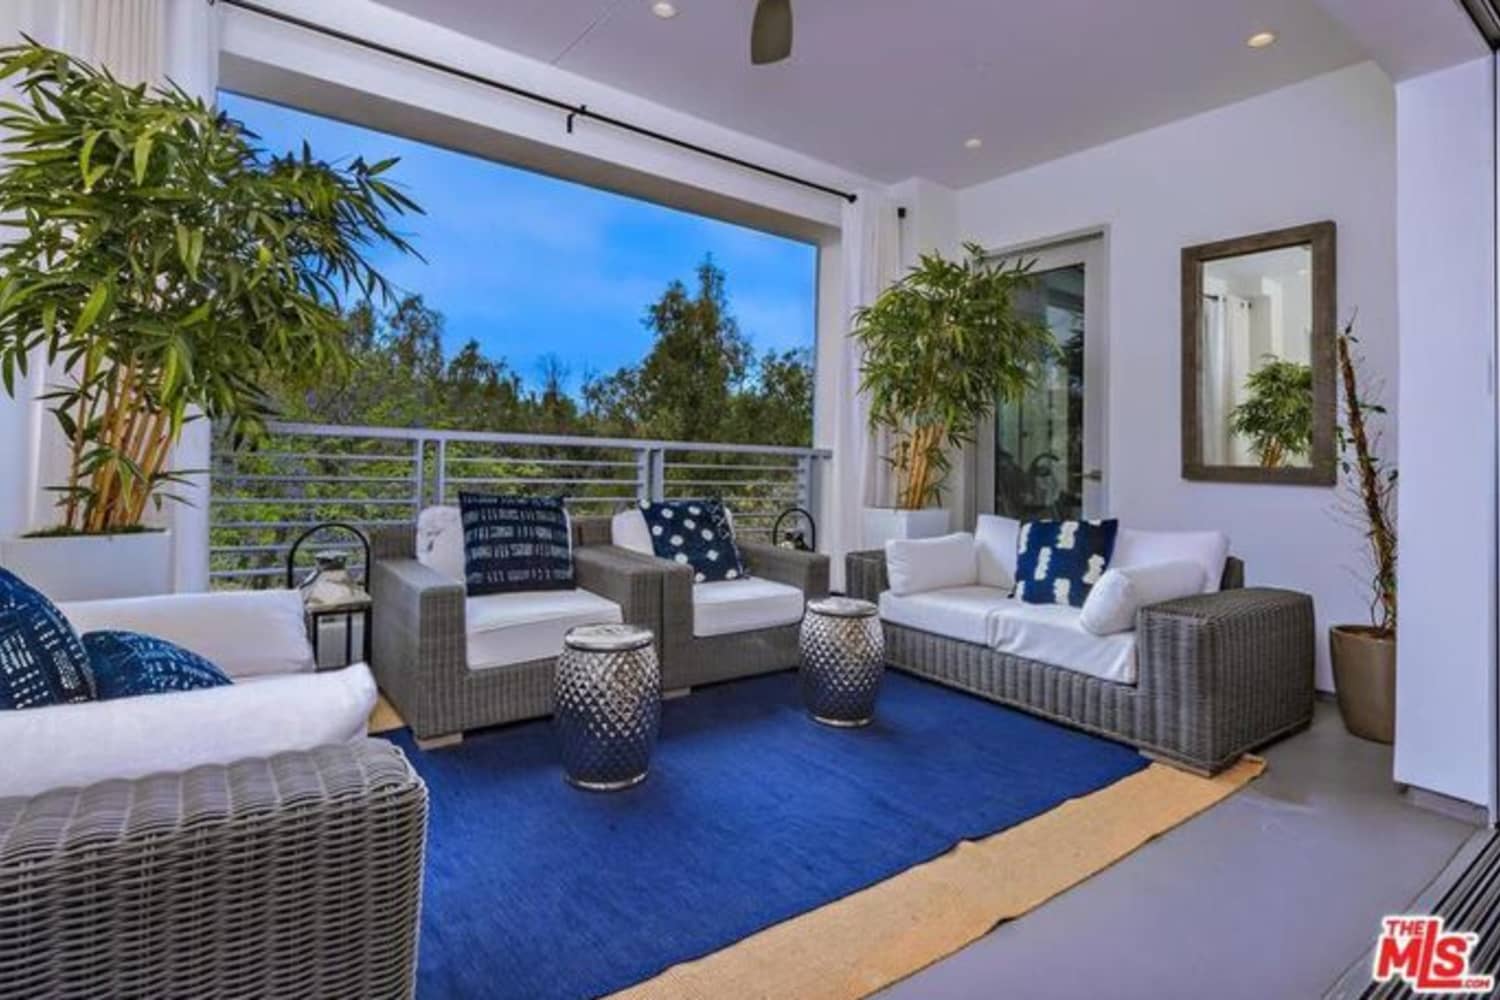 Michael Strahan Lists His Luxe Beverly Hills Condo For 44 Million Flipboard 